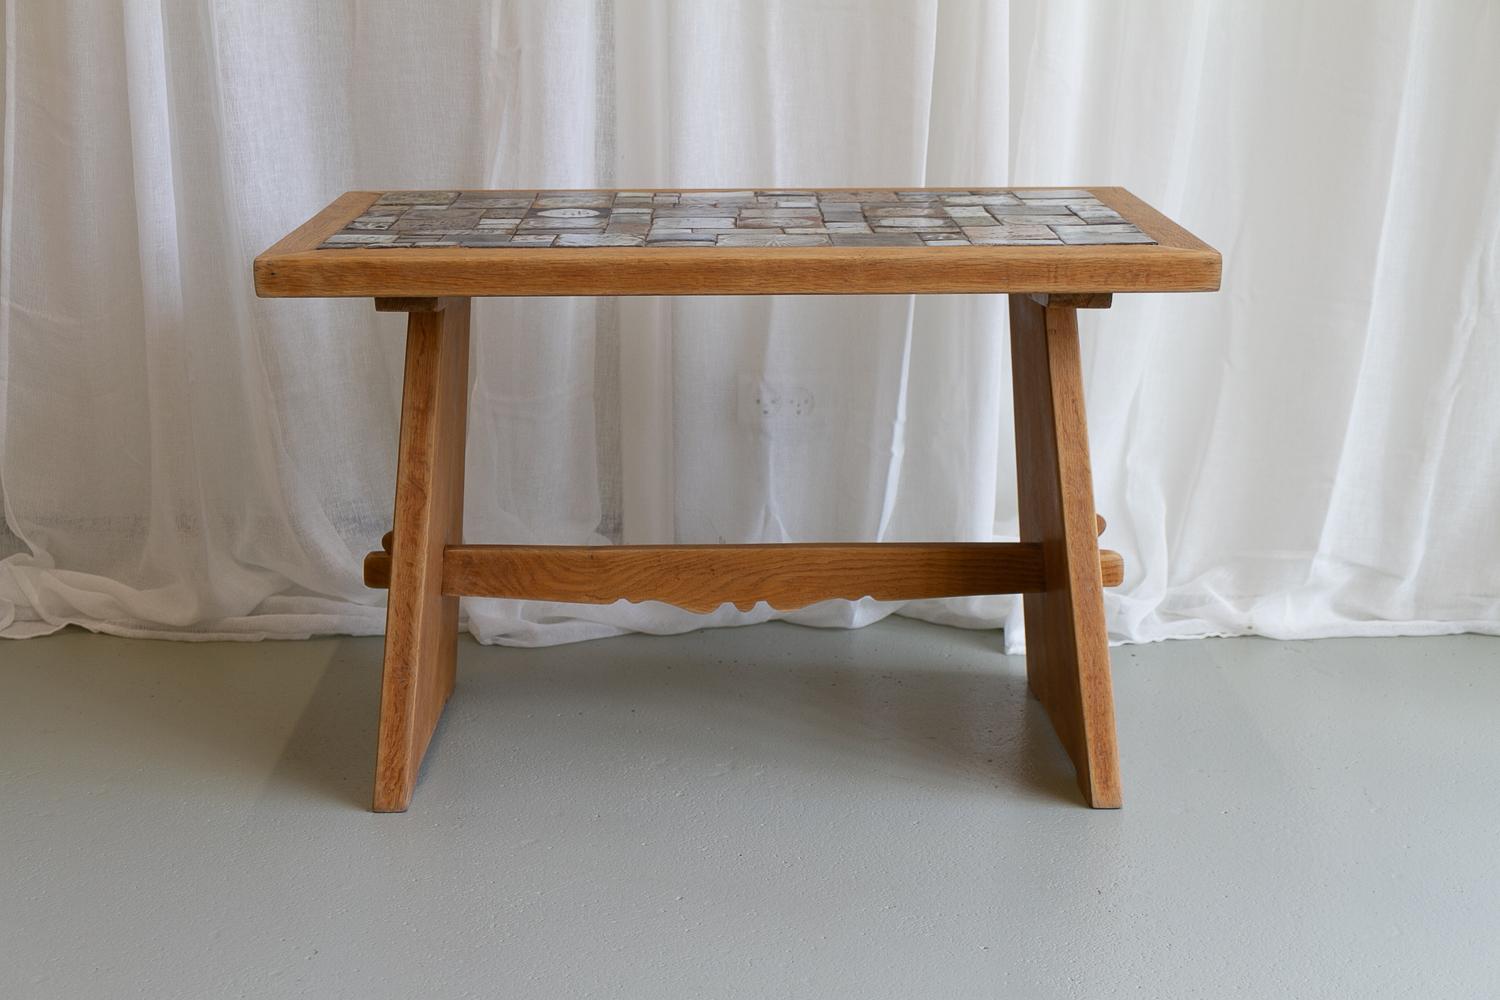 Vintage Danish Oak Coffee Table Attributed to Tue Poulsen, 1960s.
Danish Mid-Century Modern coffee or side table in brutalist style. Frame in Nordic oak. Ceramic tiles are individually hand made in different sizes, patterns and colors.
The tiles are